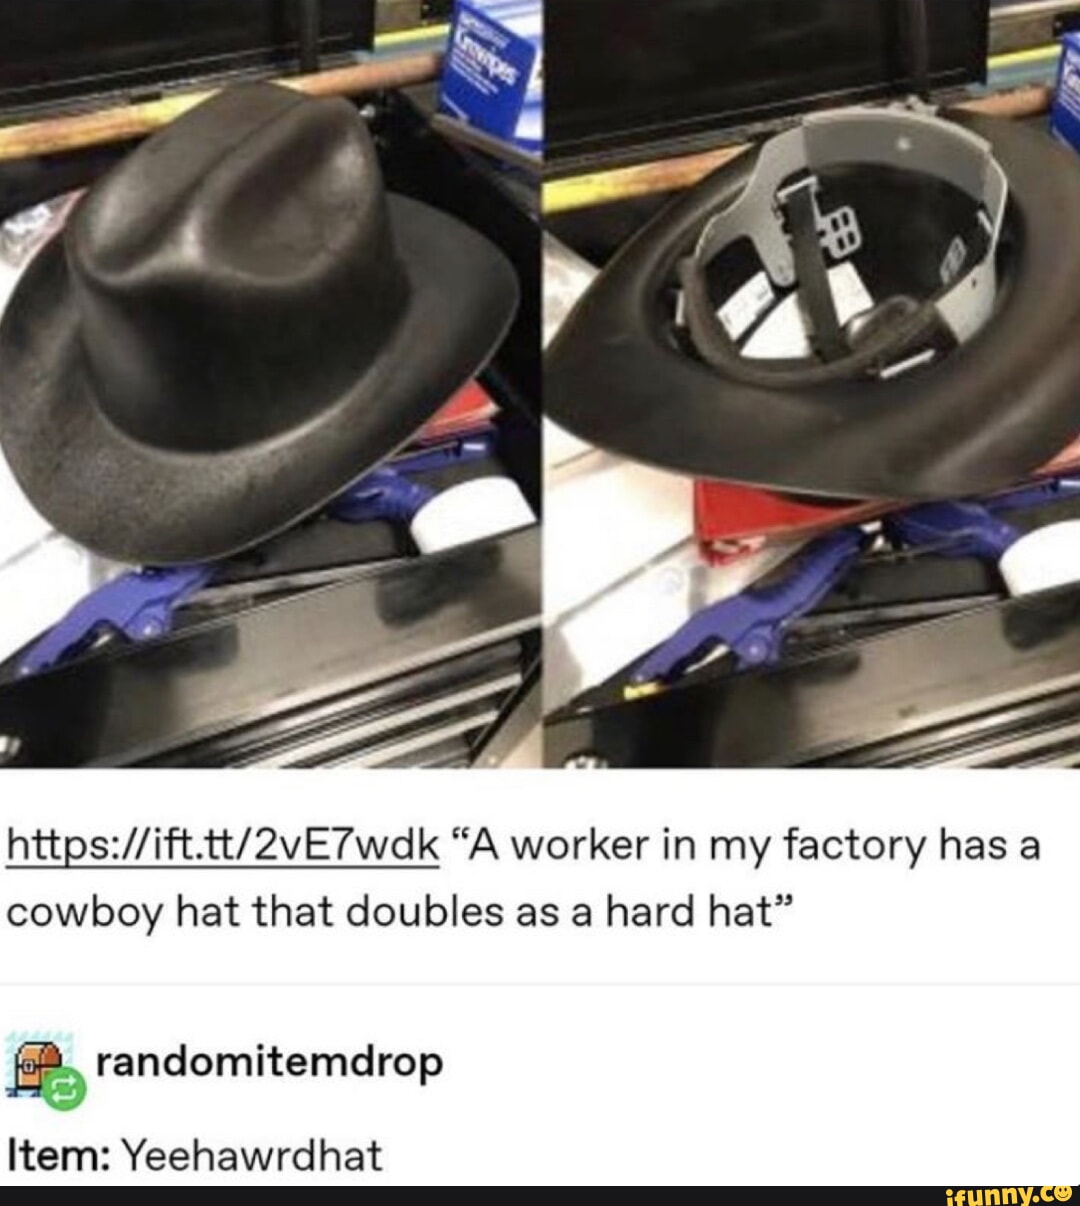 A worker in my factory has a cowboy hat that doubles as a hard hat